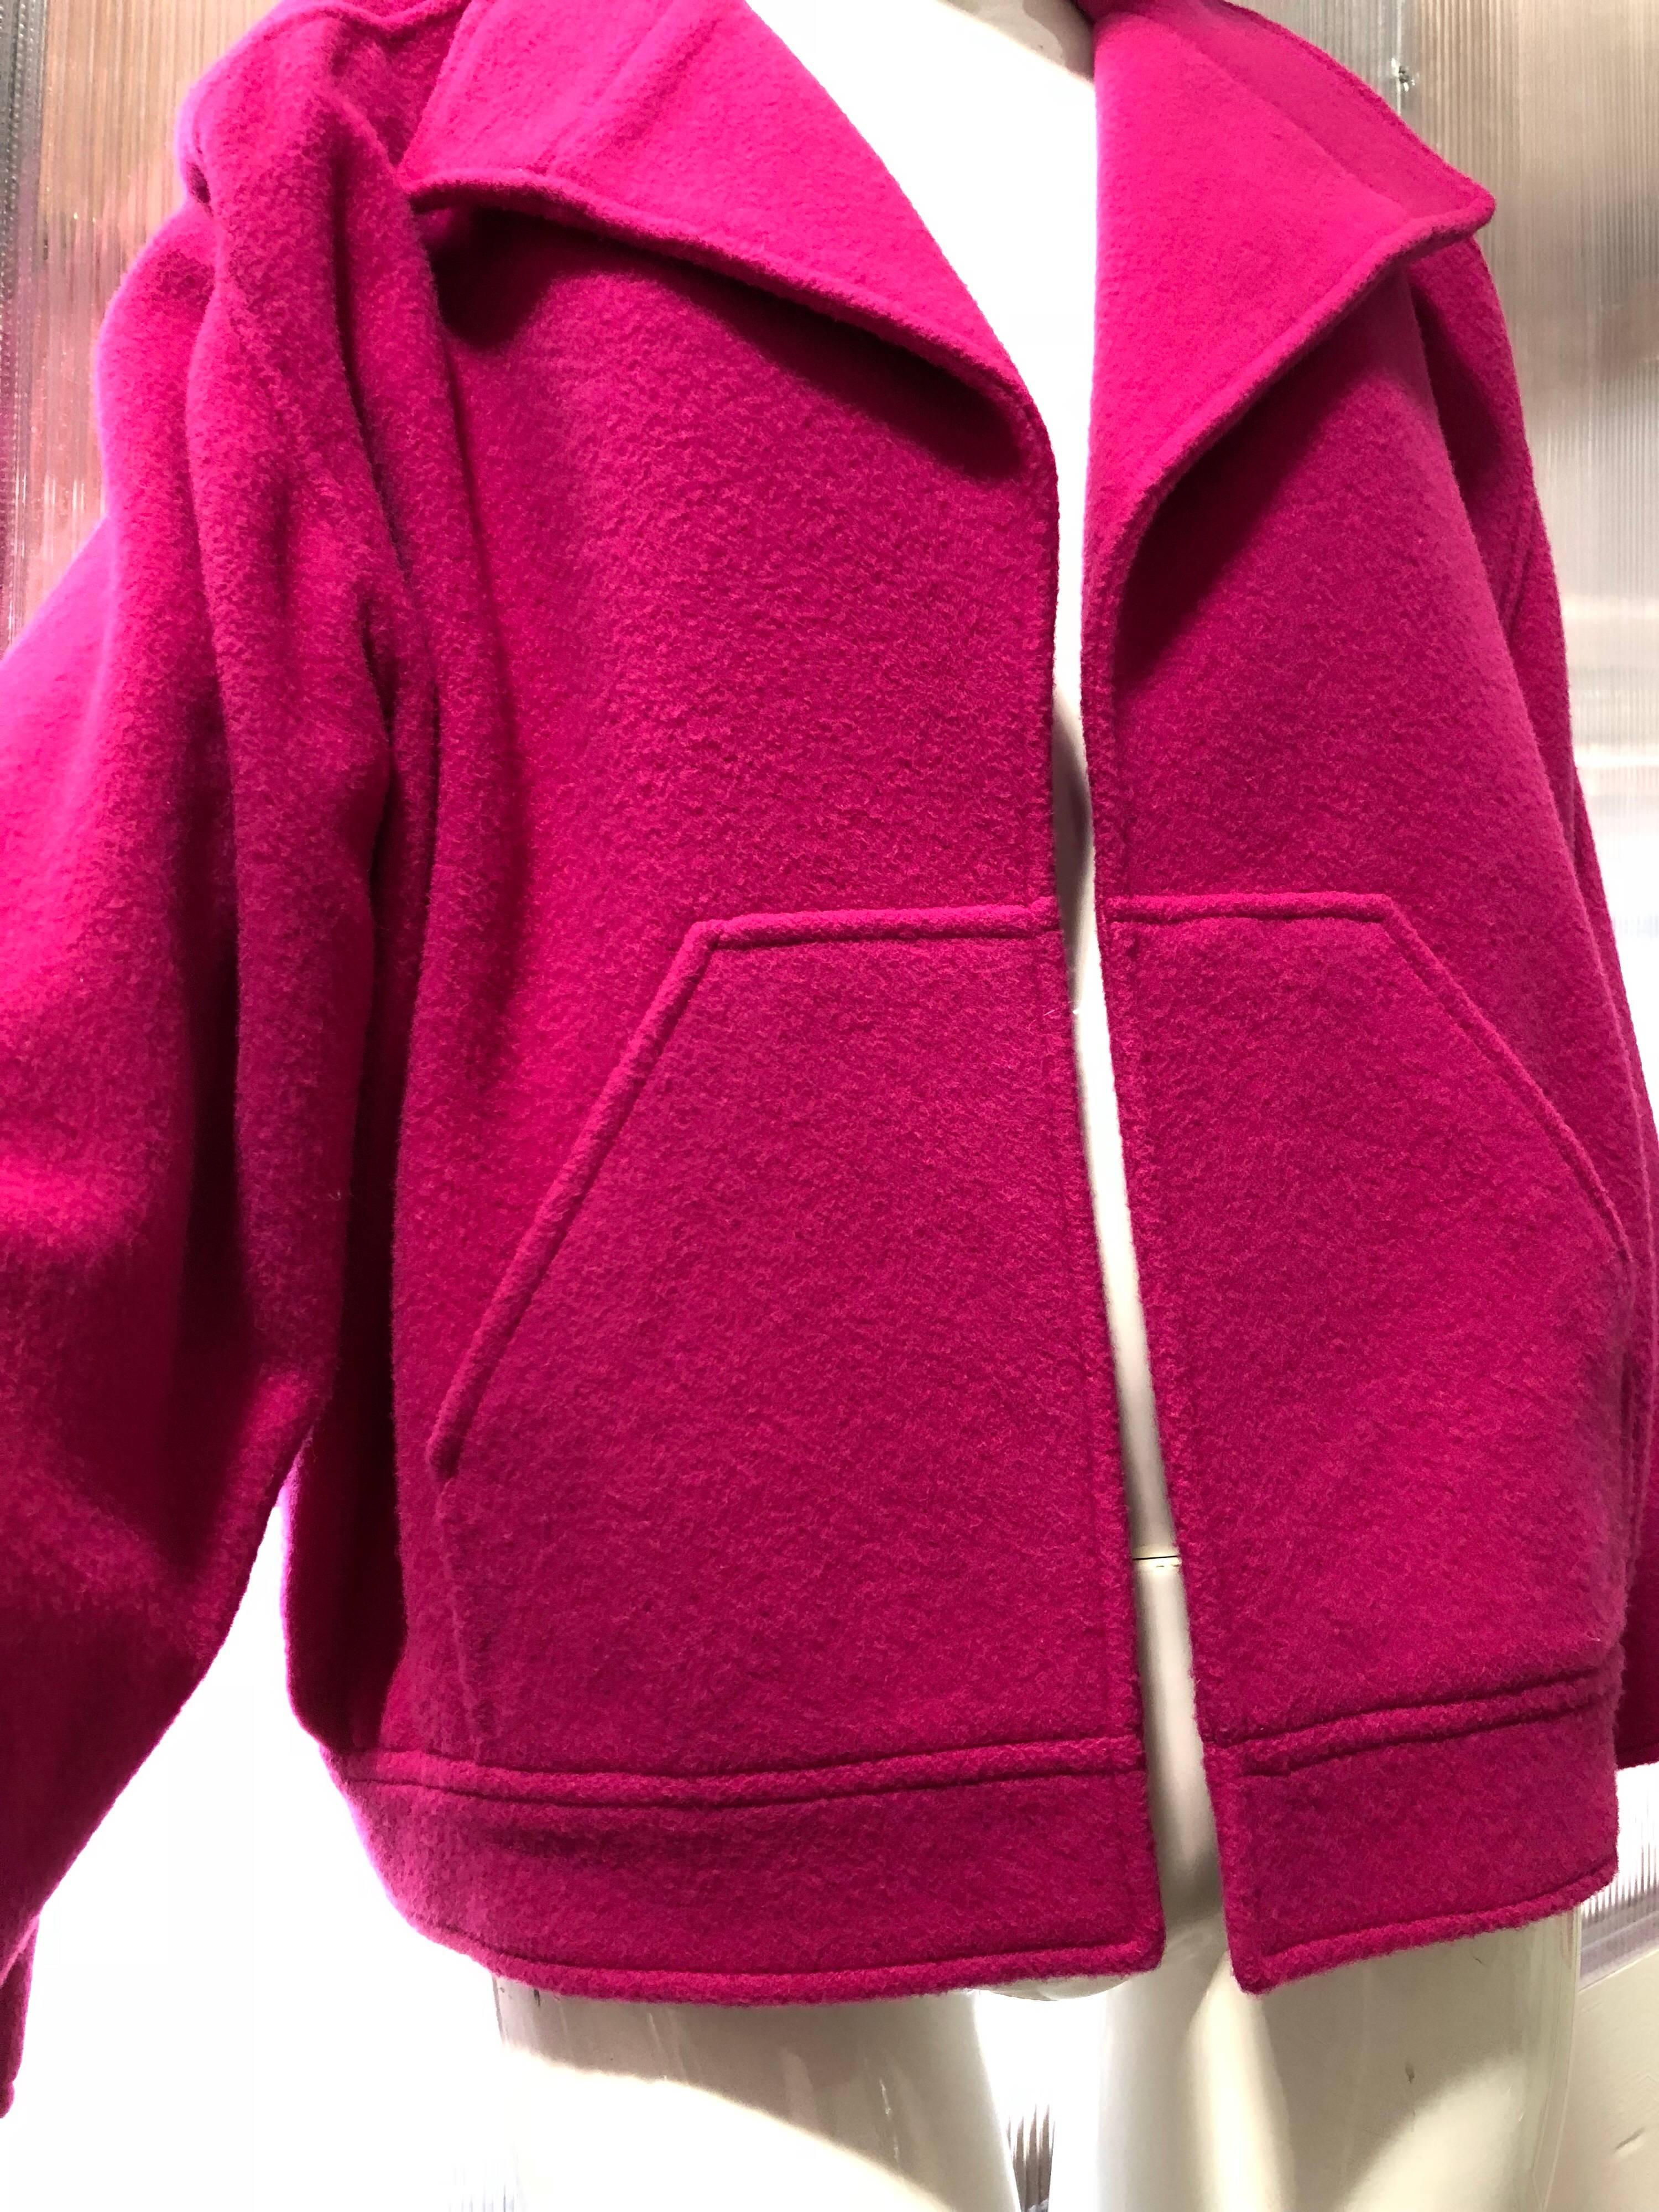 1980s Chloe by Karl Lagerfeld hot pink lightweight mohair spring coat with no closures.  Easy, Asian-inspired boxy cut with wide sleeves and front patch pockets.
Unlined.
Fits French size 42. 